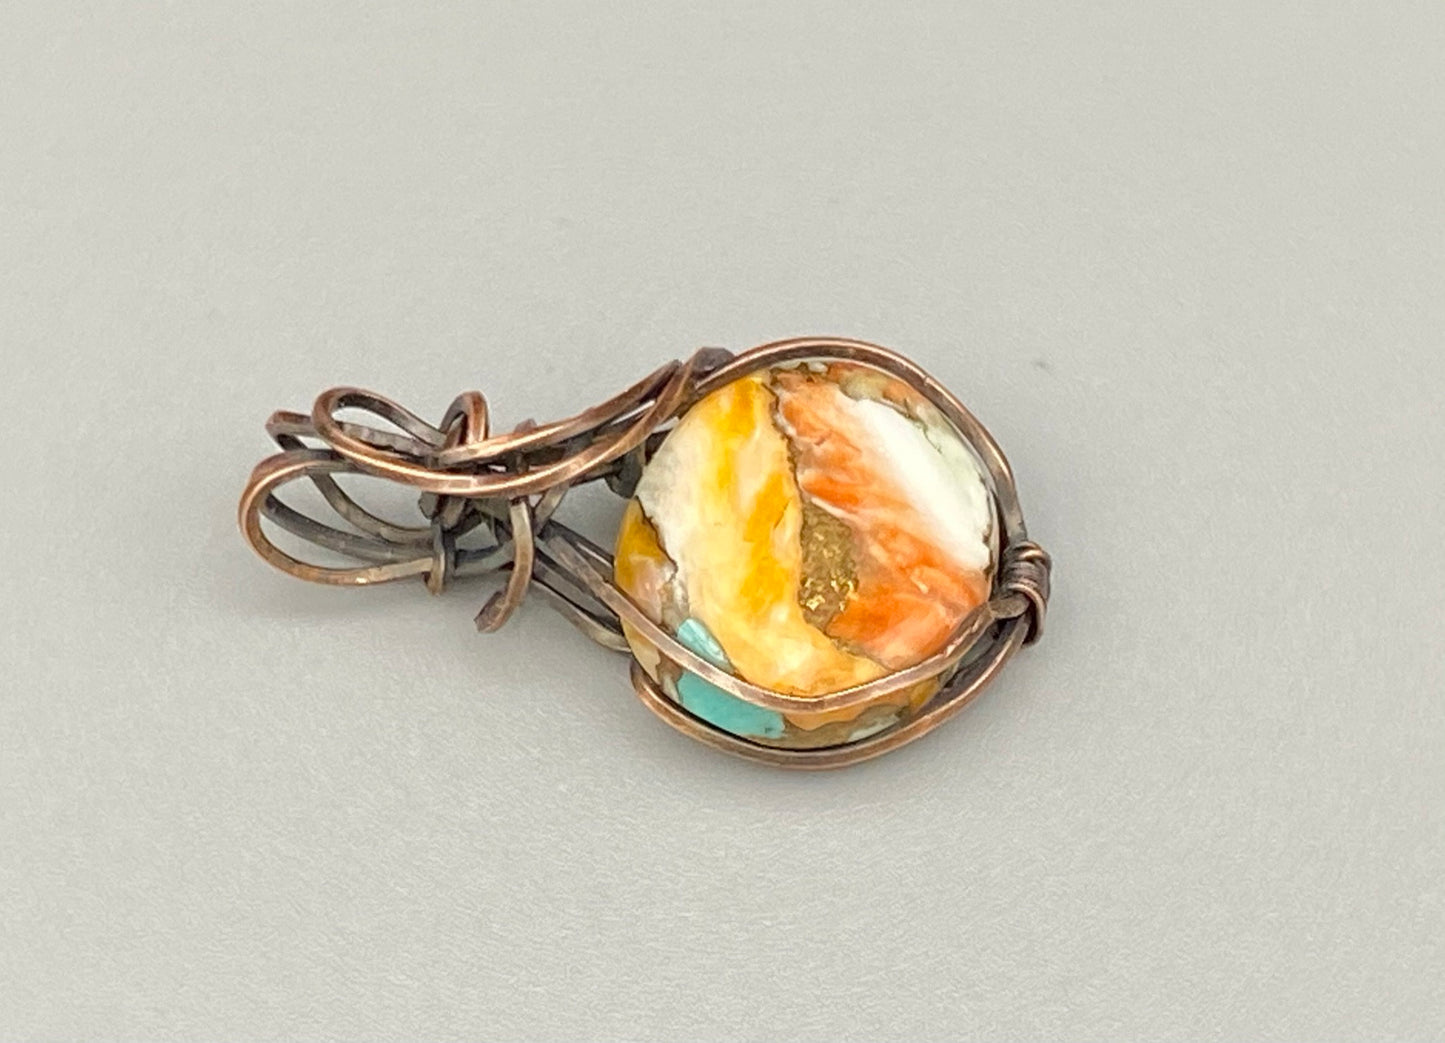 Rare Oval Copper and Turquoise Wire Wrapped Pendant